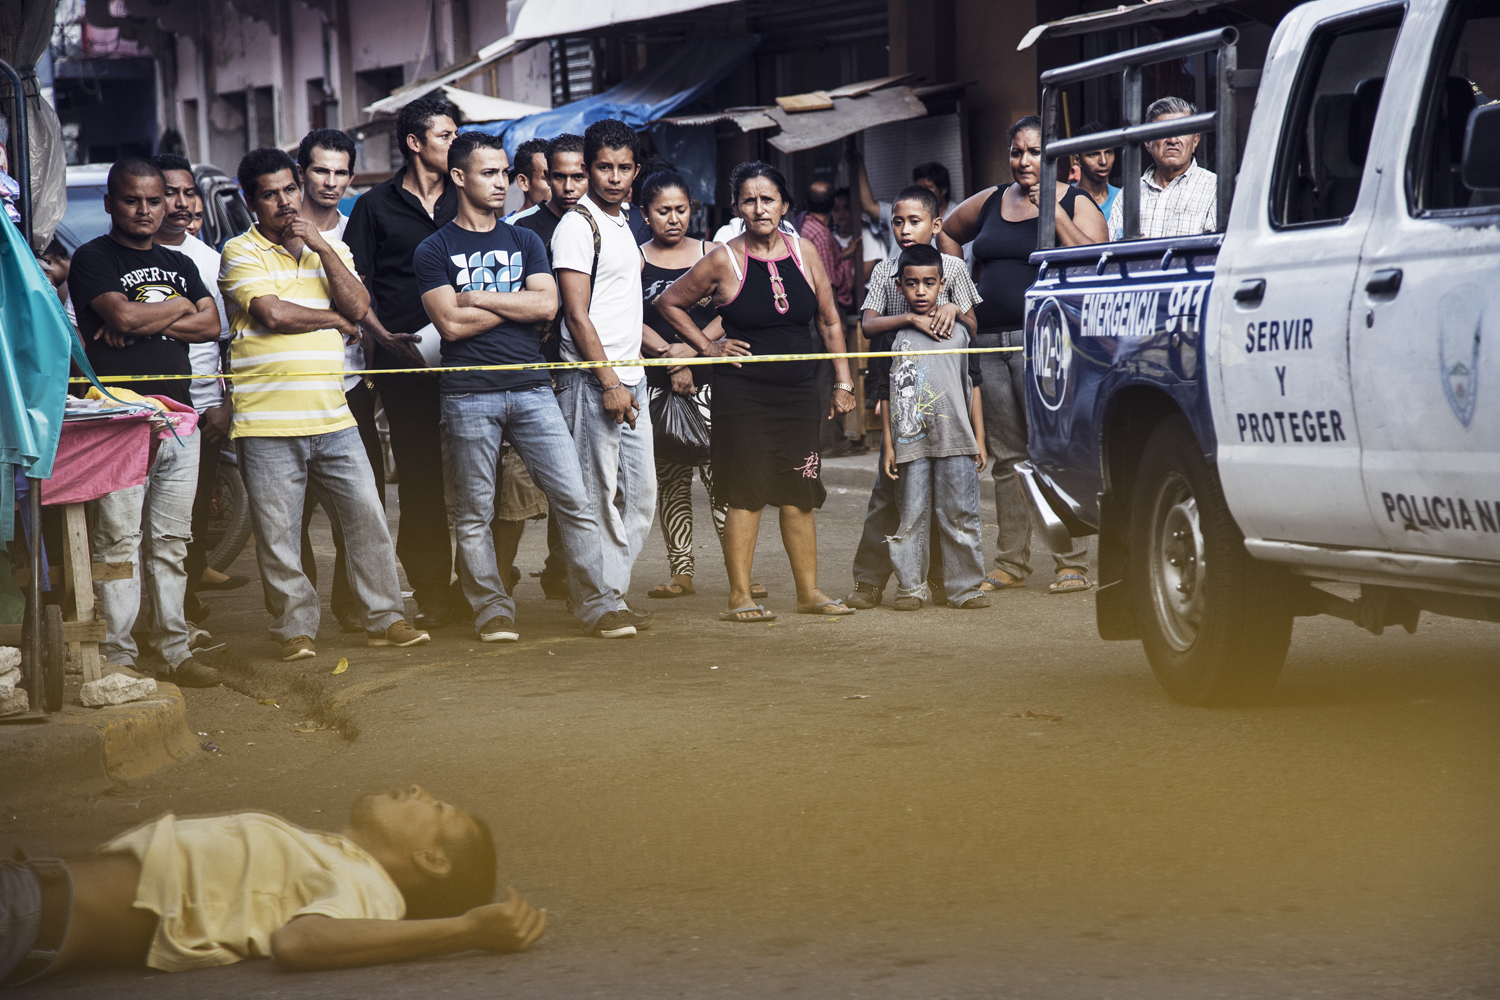 Julio Manzanares, a fruit seller at the market in the Barrio Centro neighborhood of San Pedro Sula, was gunned down on a busy Saturday afternoon. Honduras. July 19, 2014.